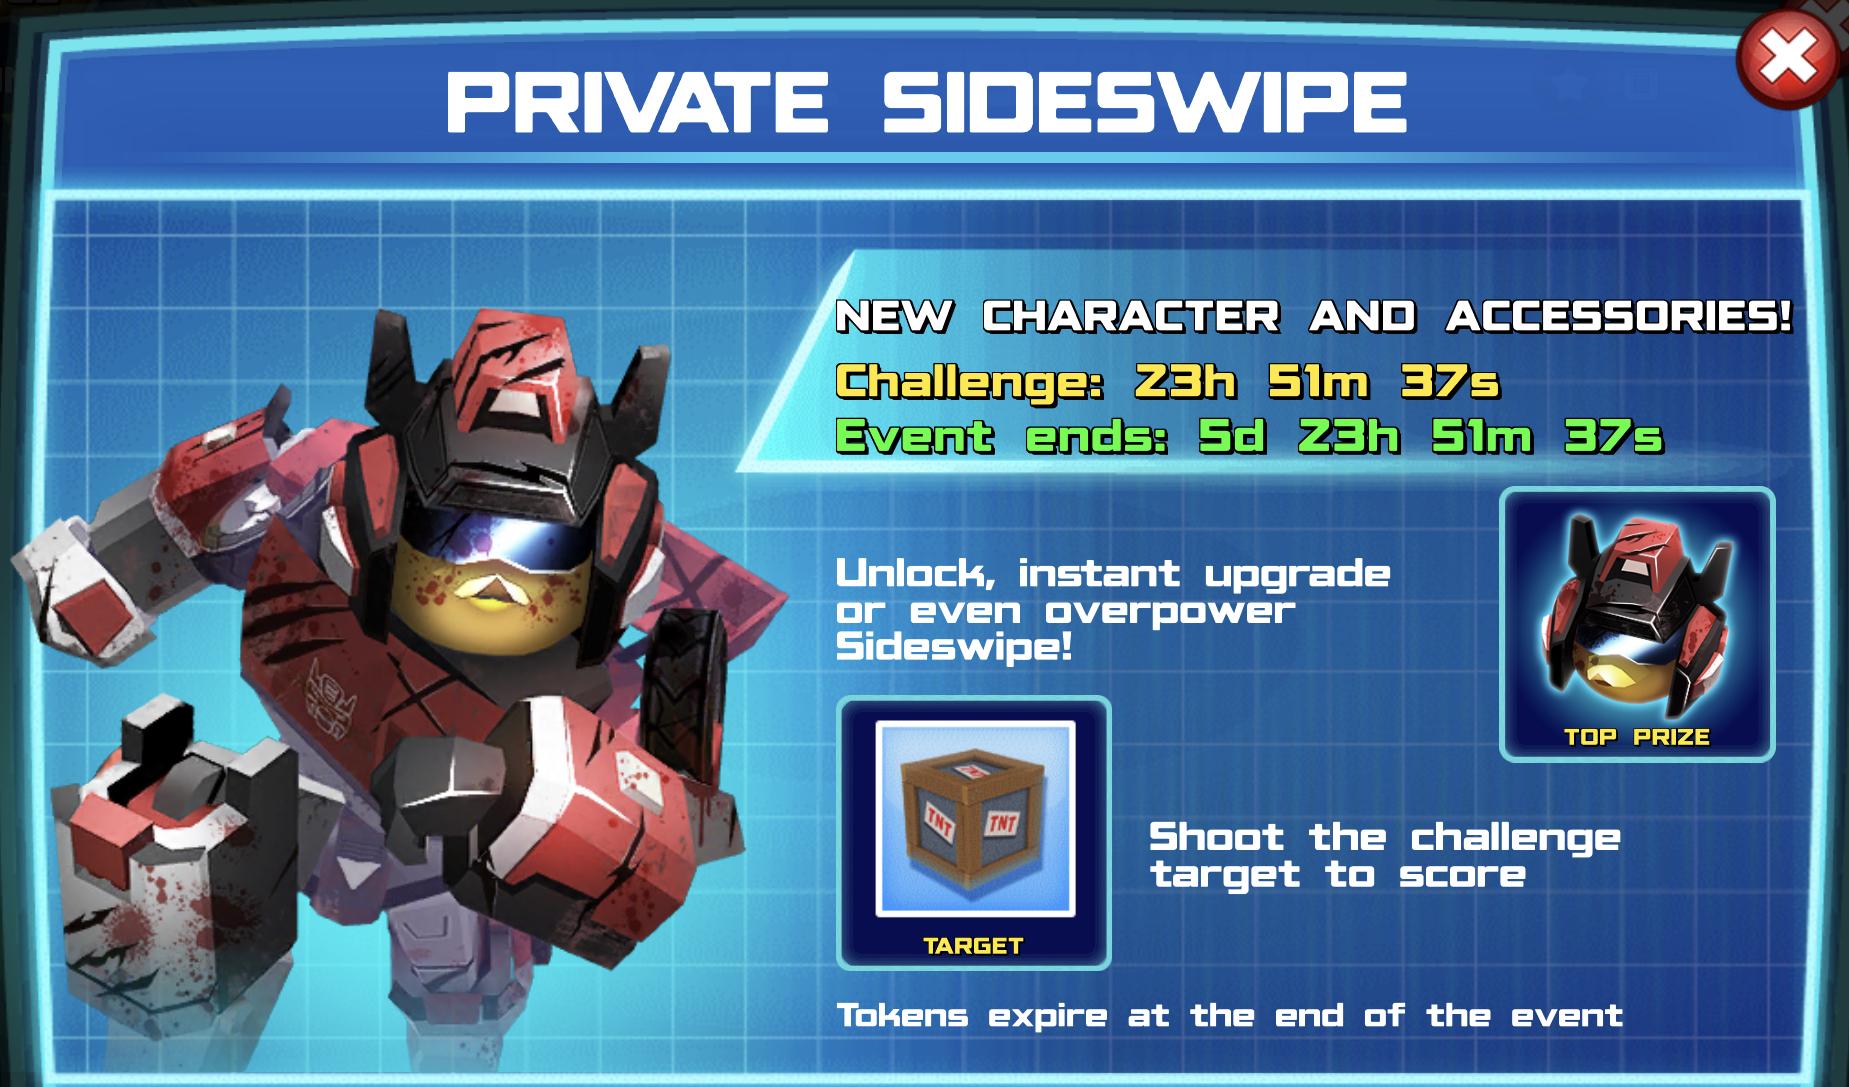 The banner for Private Sideswipe event